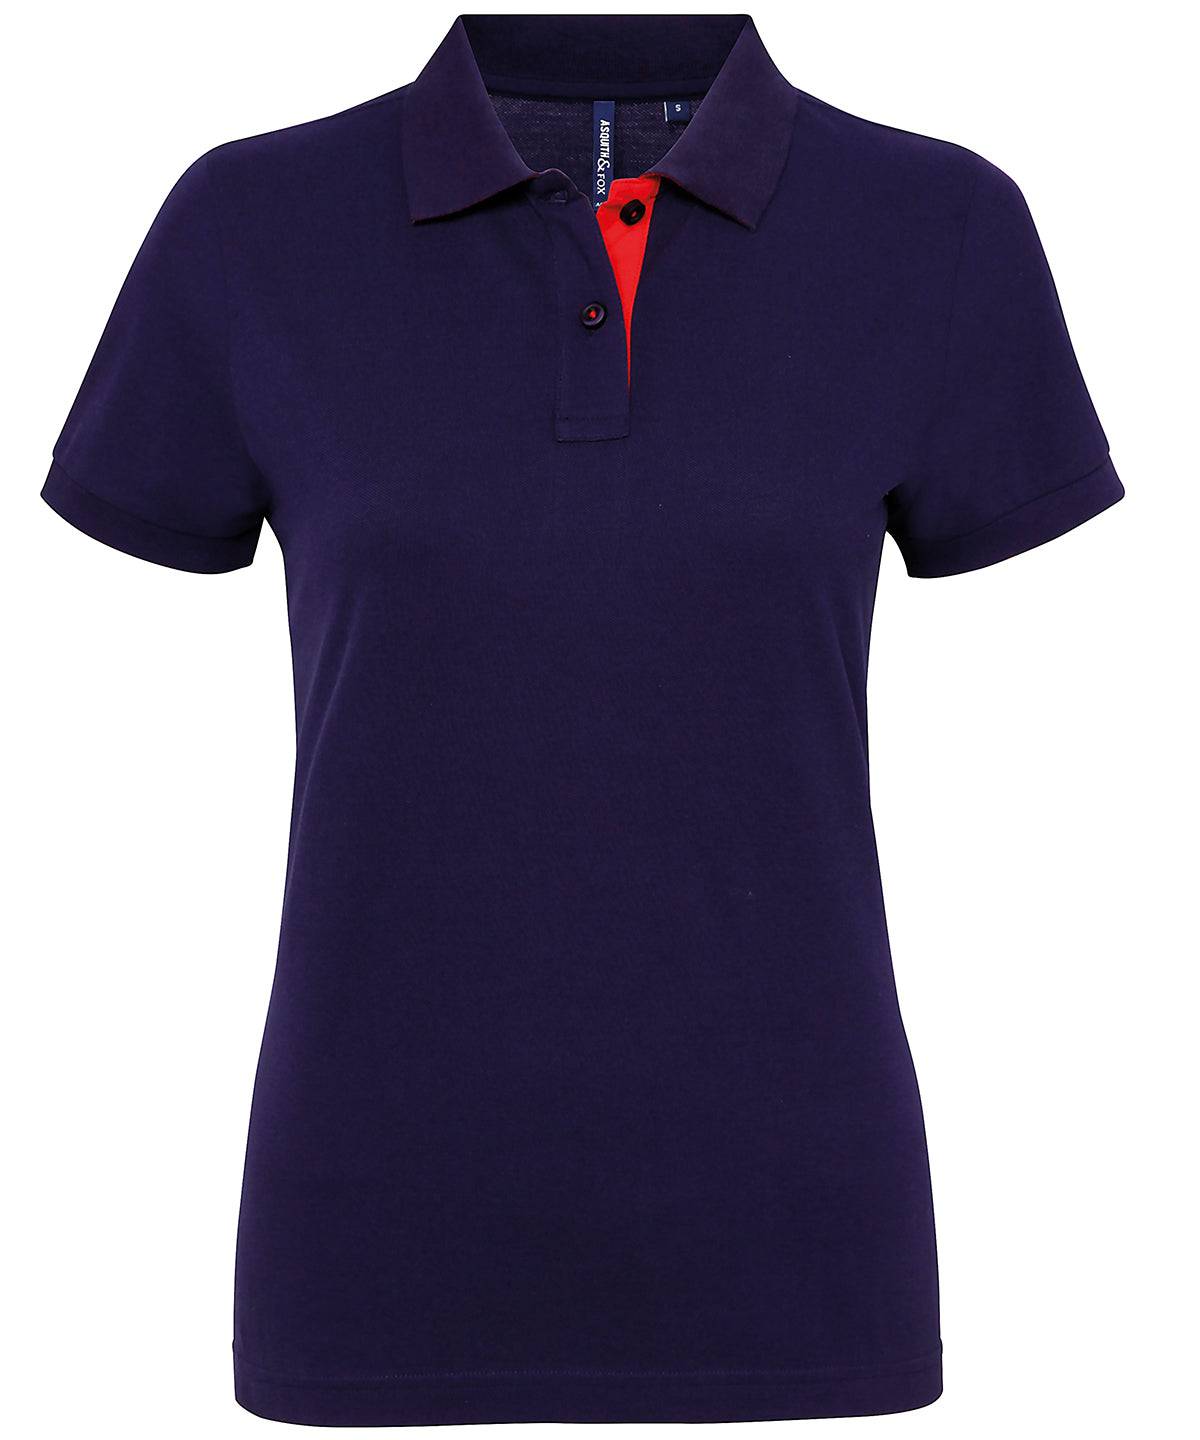 Navy/Red - Women's contrast polo